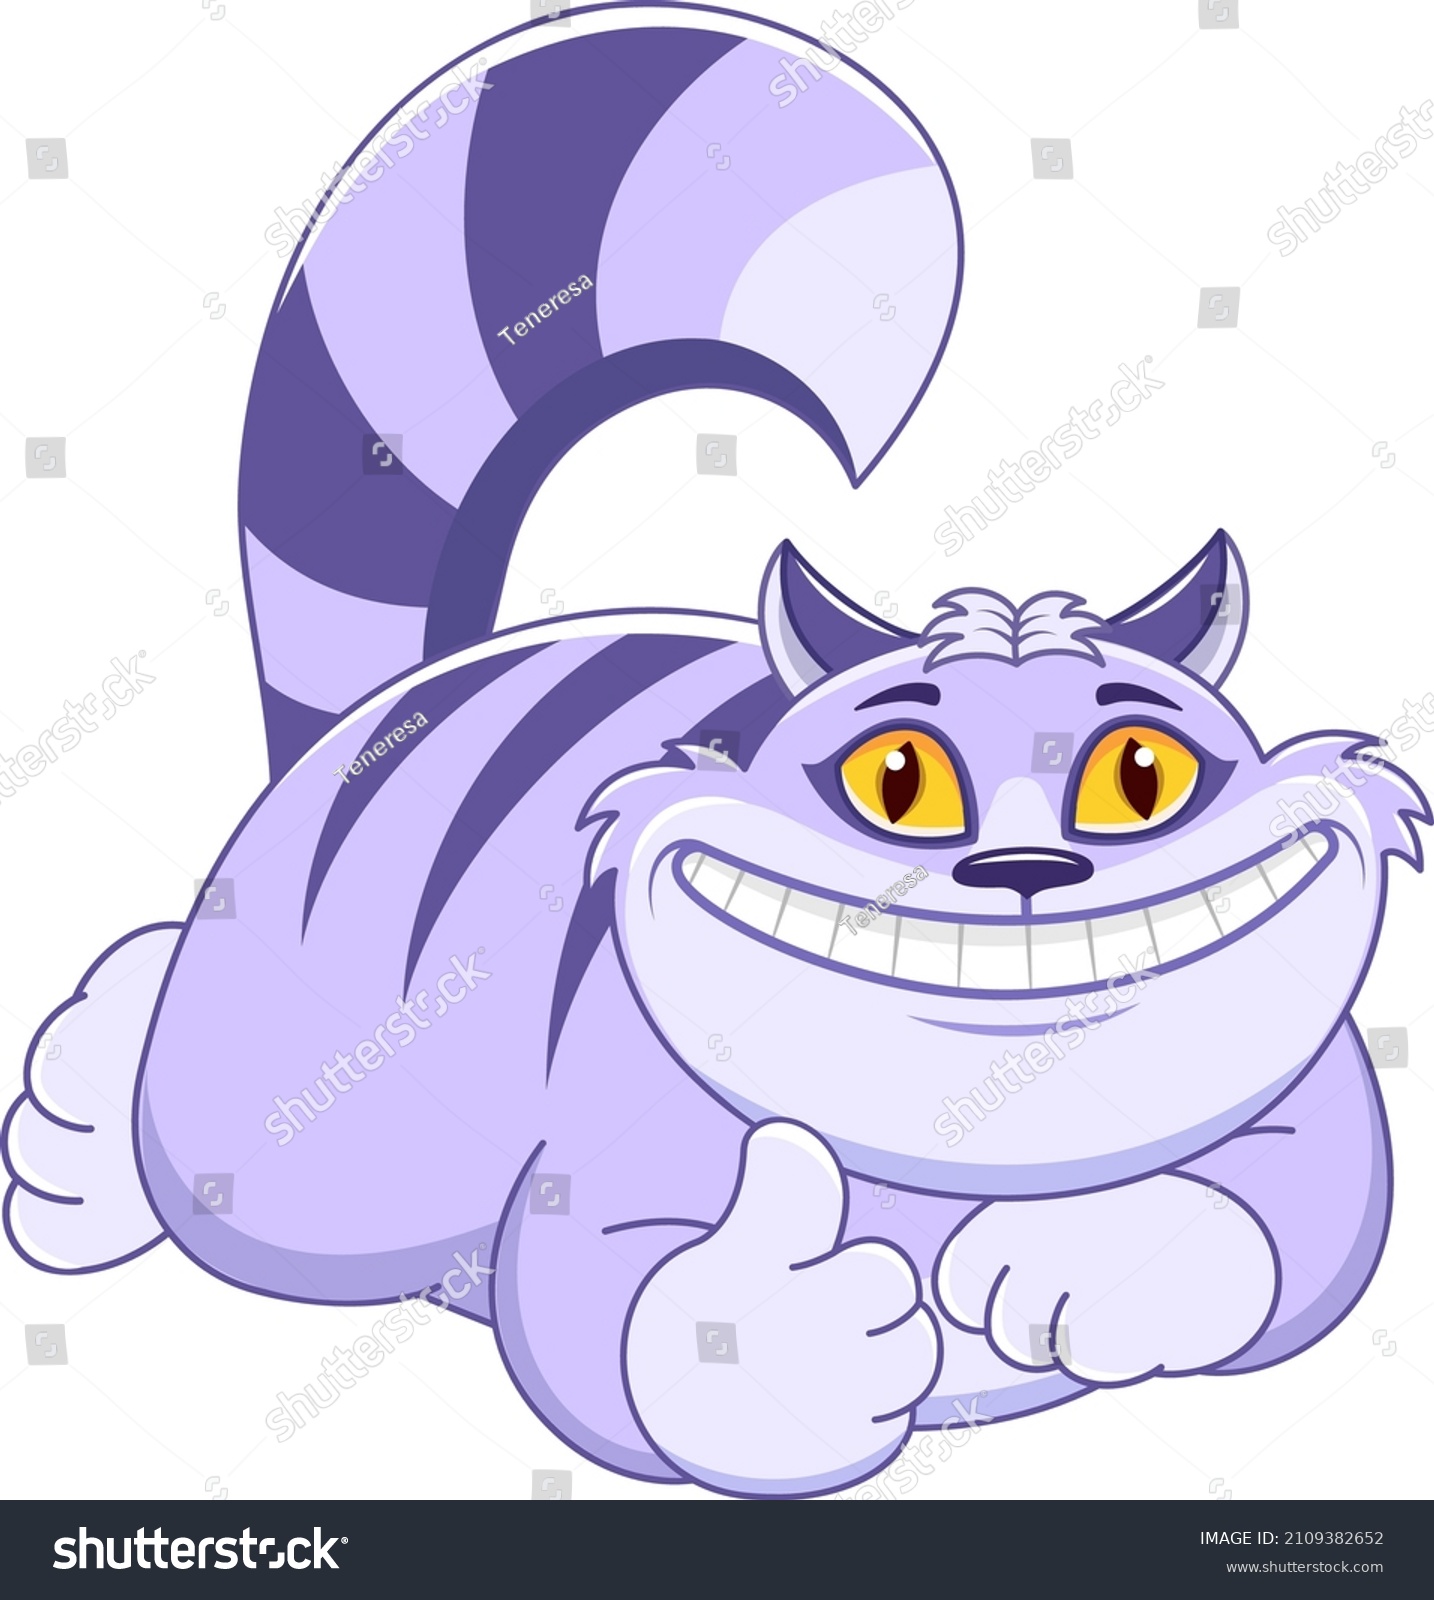 SVG of Cheshire cat showing thumbs up sign svg